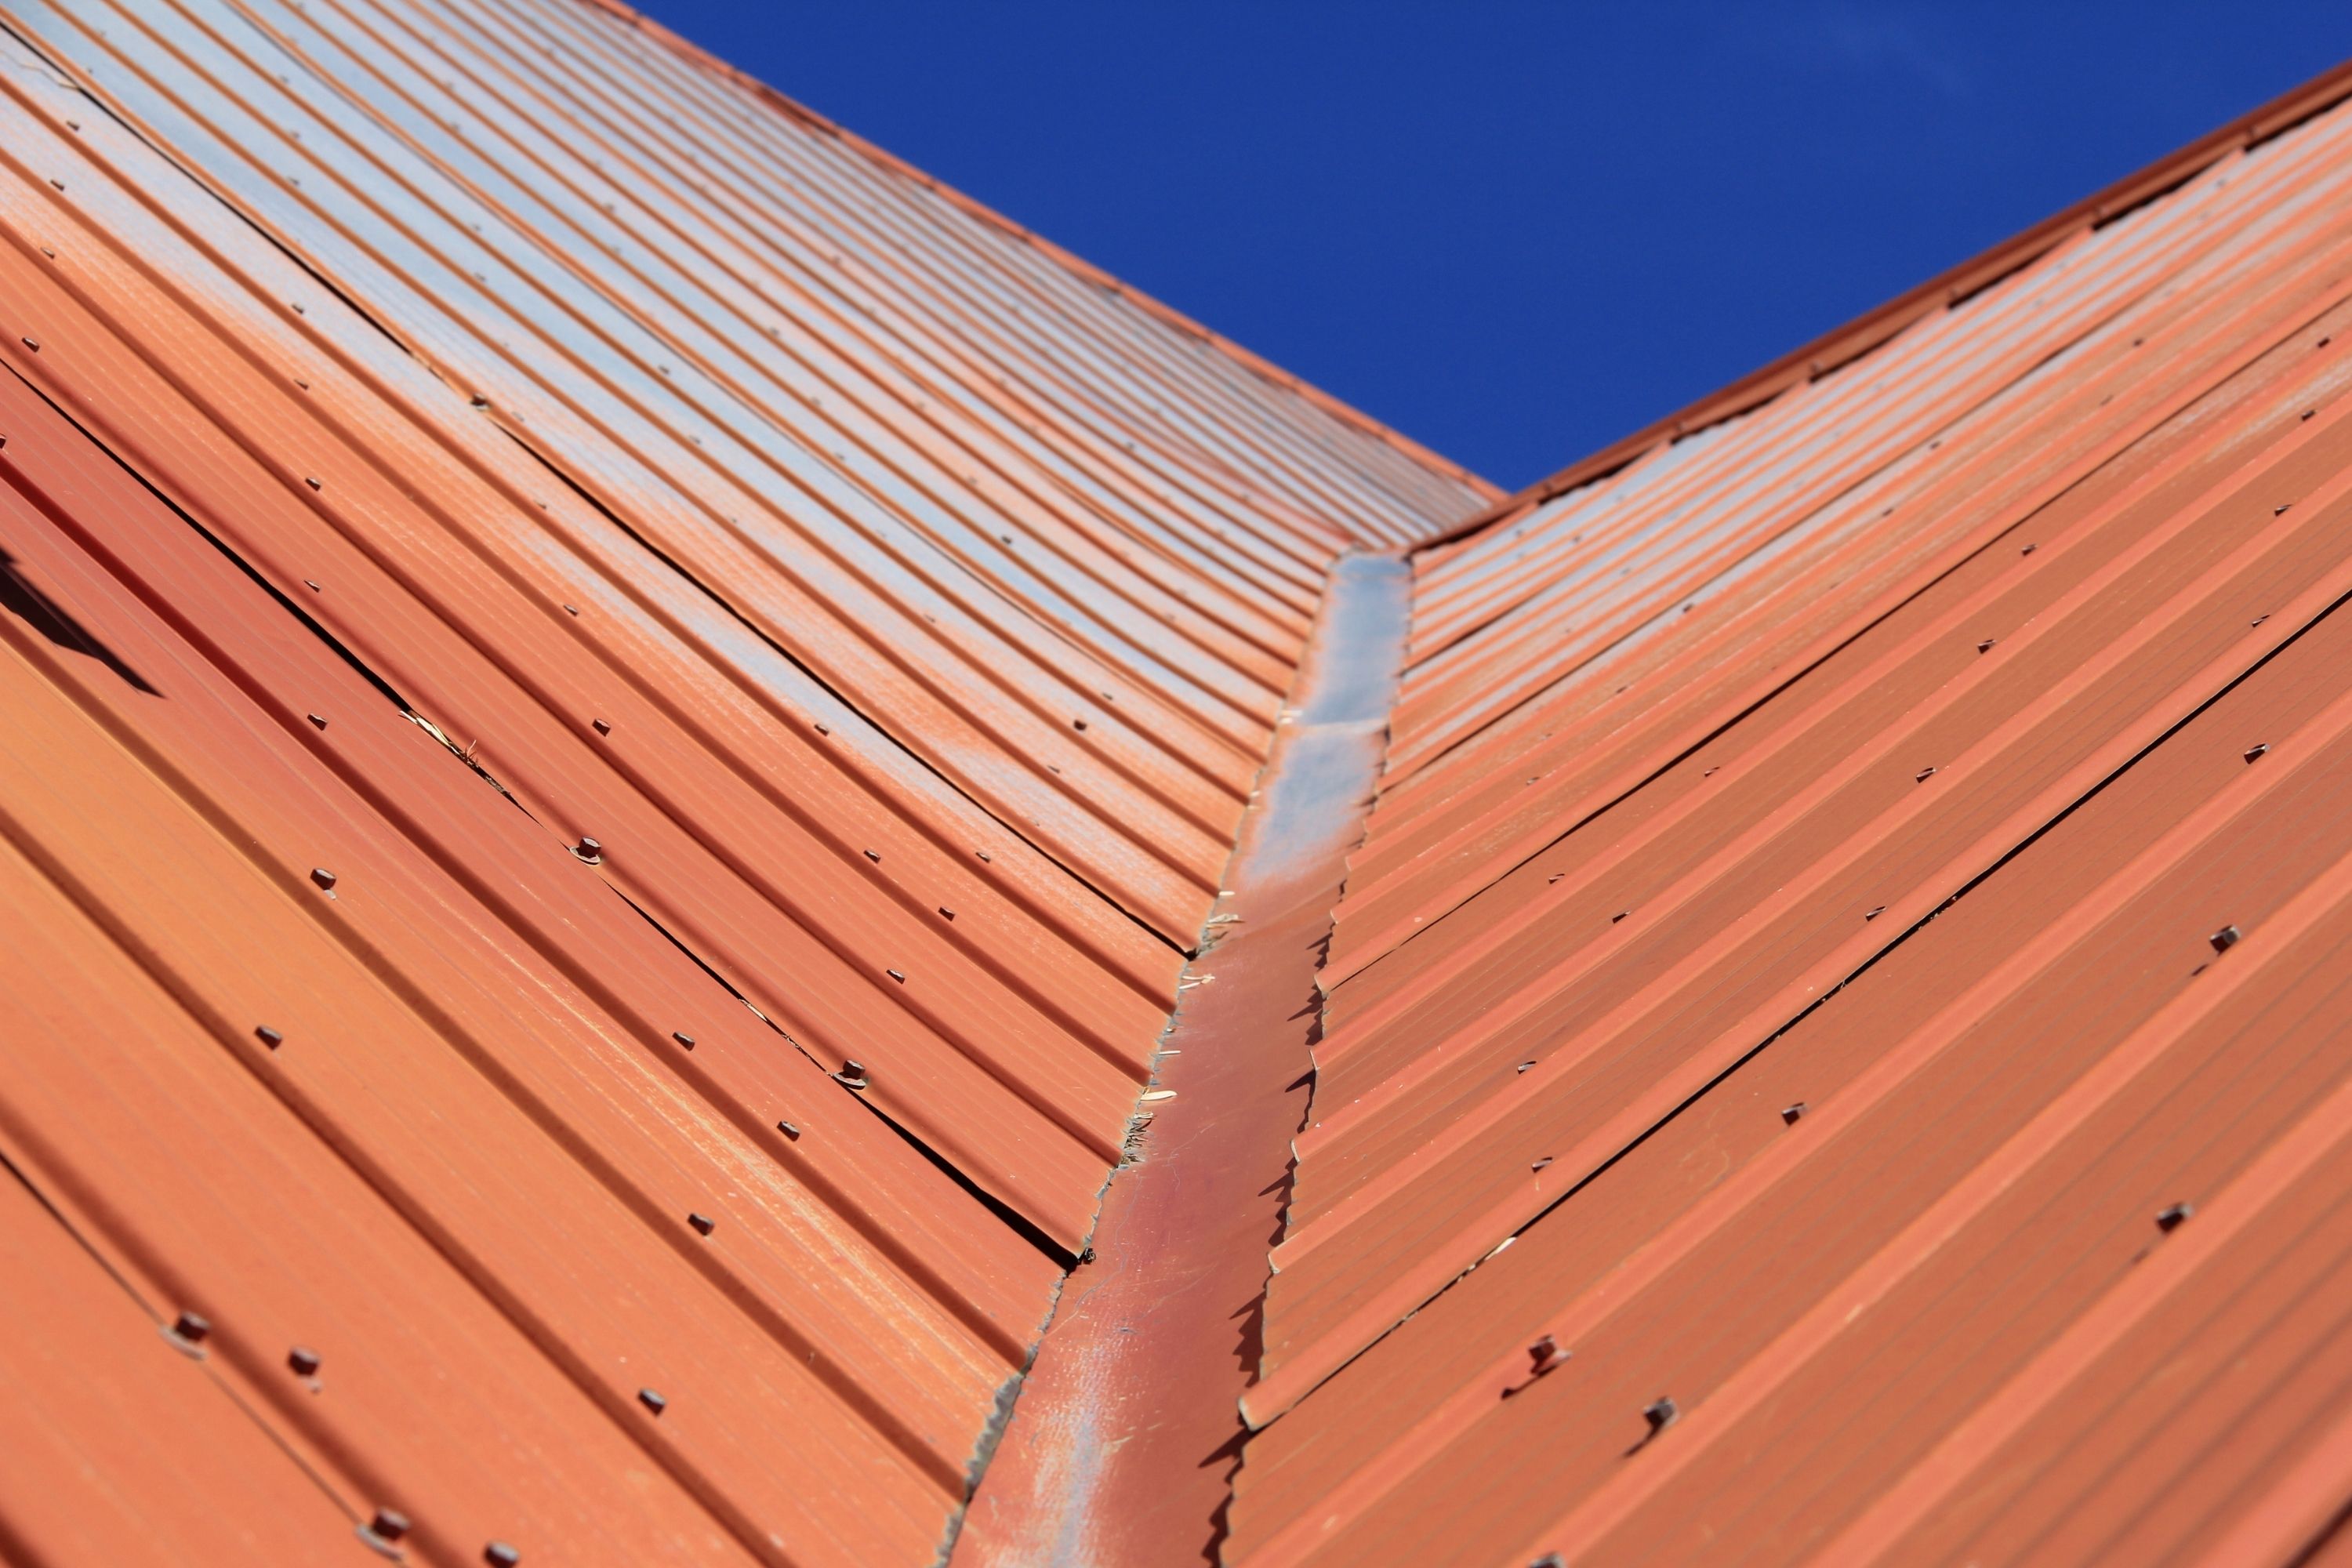 Painting Rusty Metal Roof. How to Do It Right